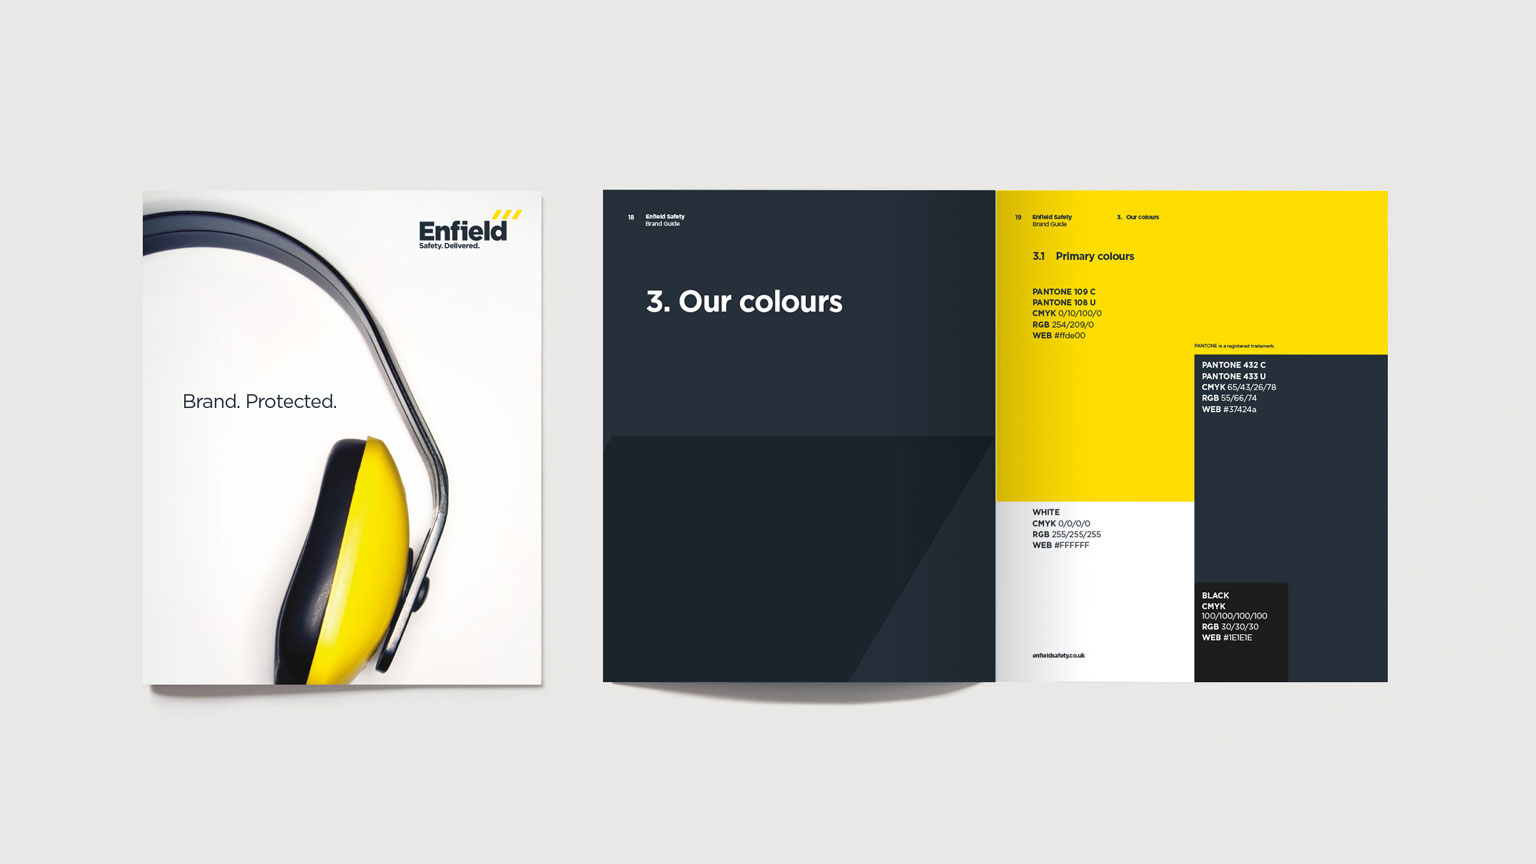 Enfield Safety rebrand by VGROUP